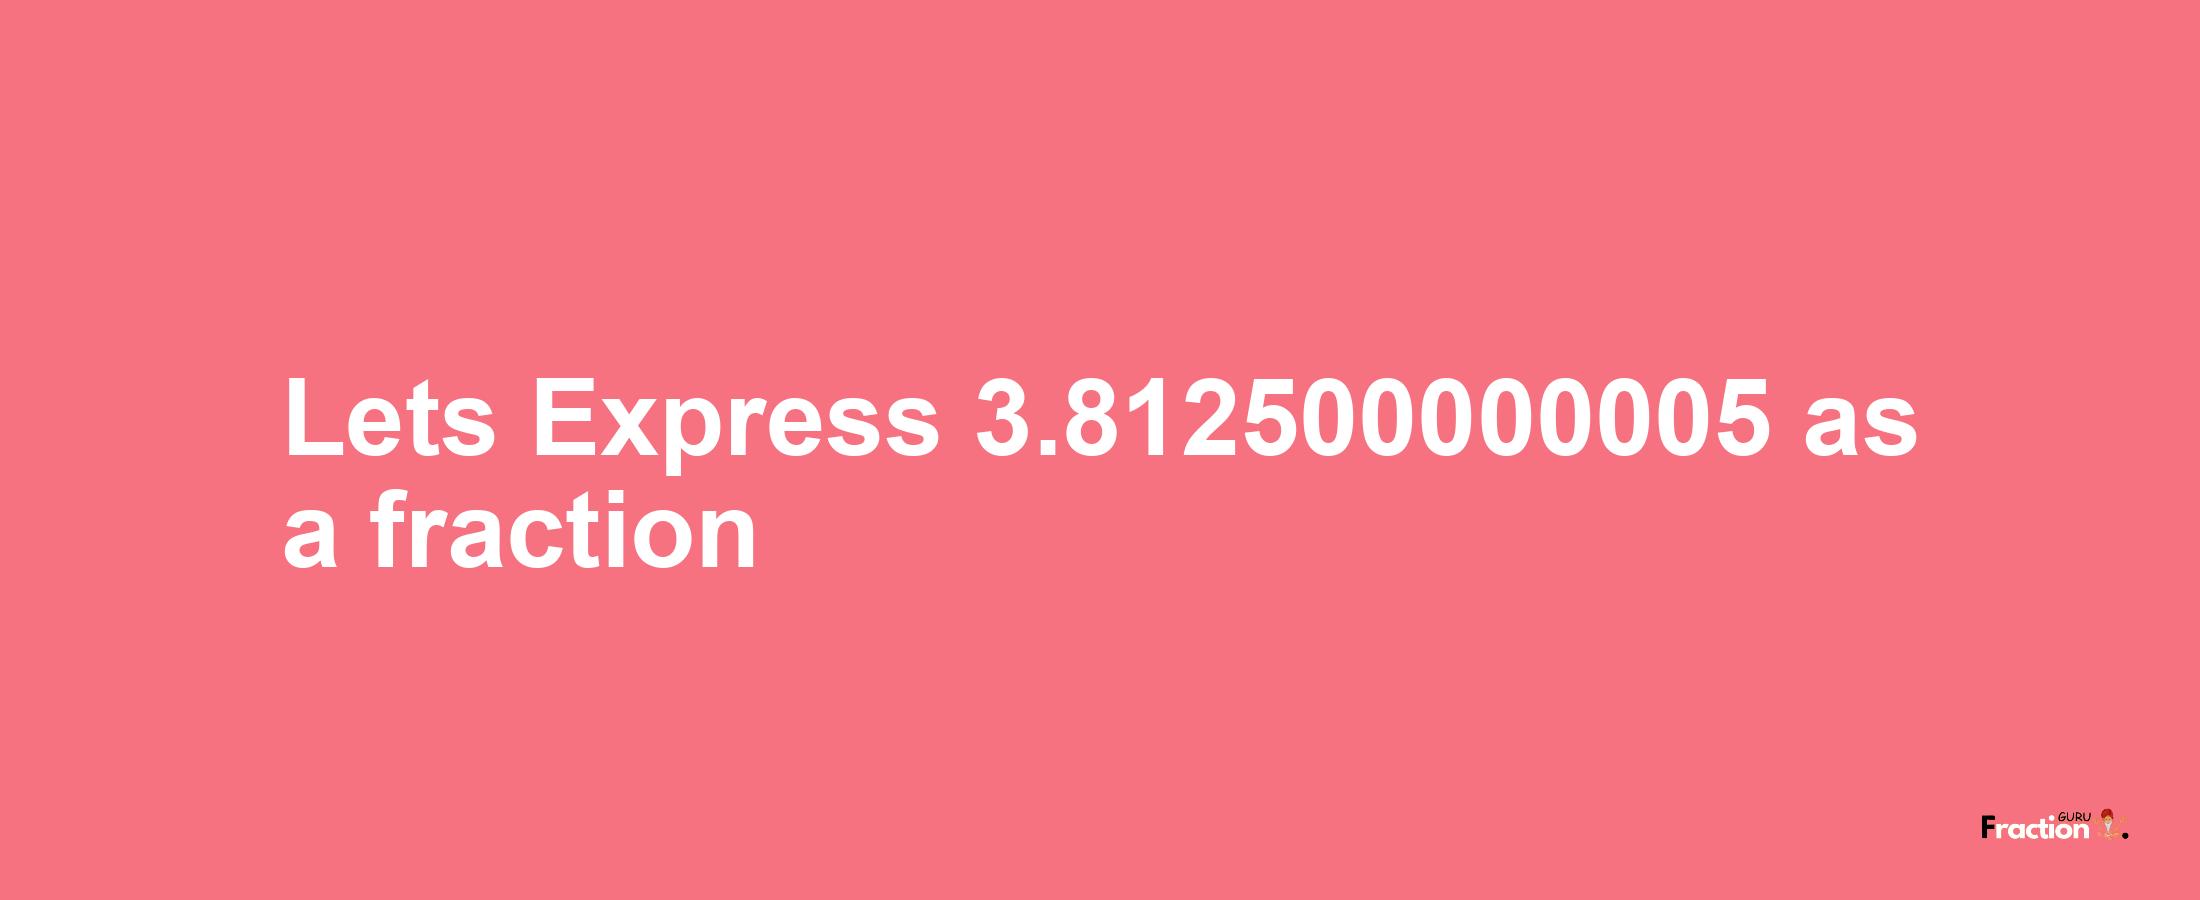 Lets Express 3.812500000005 as afraction